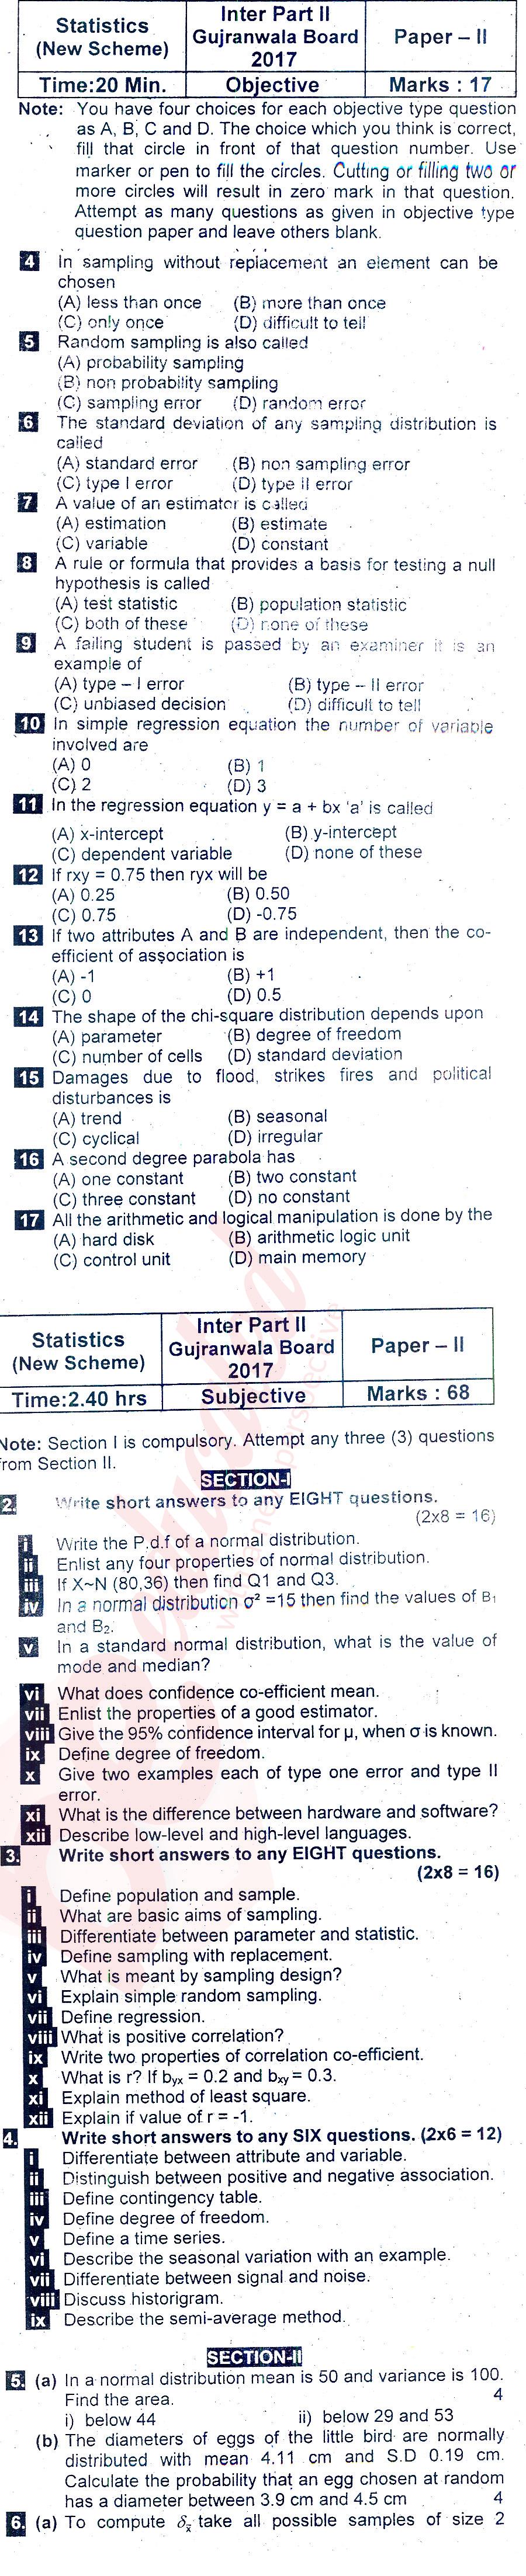 Statistics 12th class Past Paper Group 1 BISE Gujranwala 2017